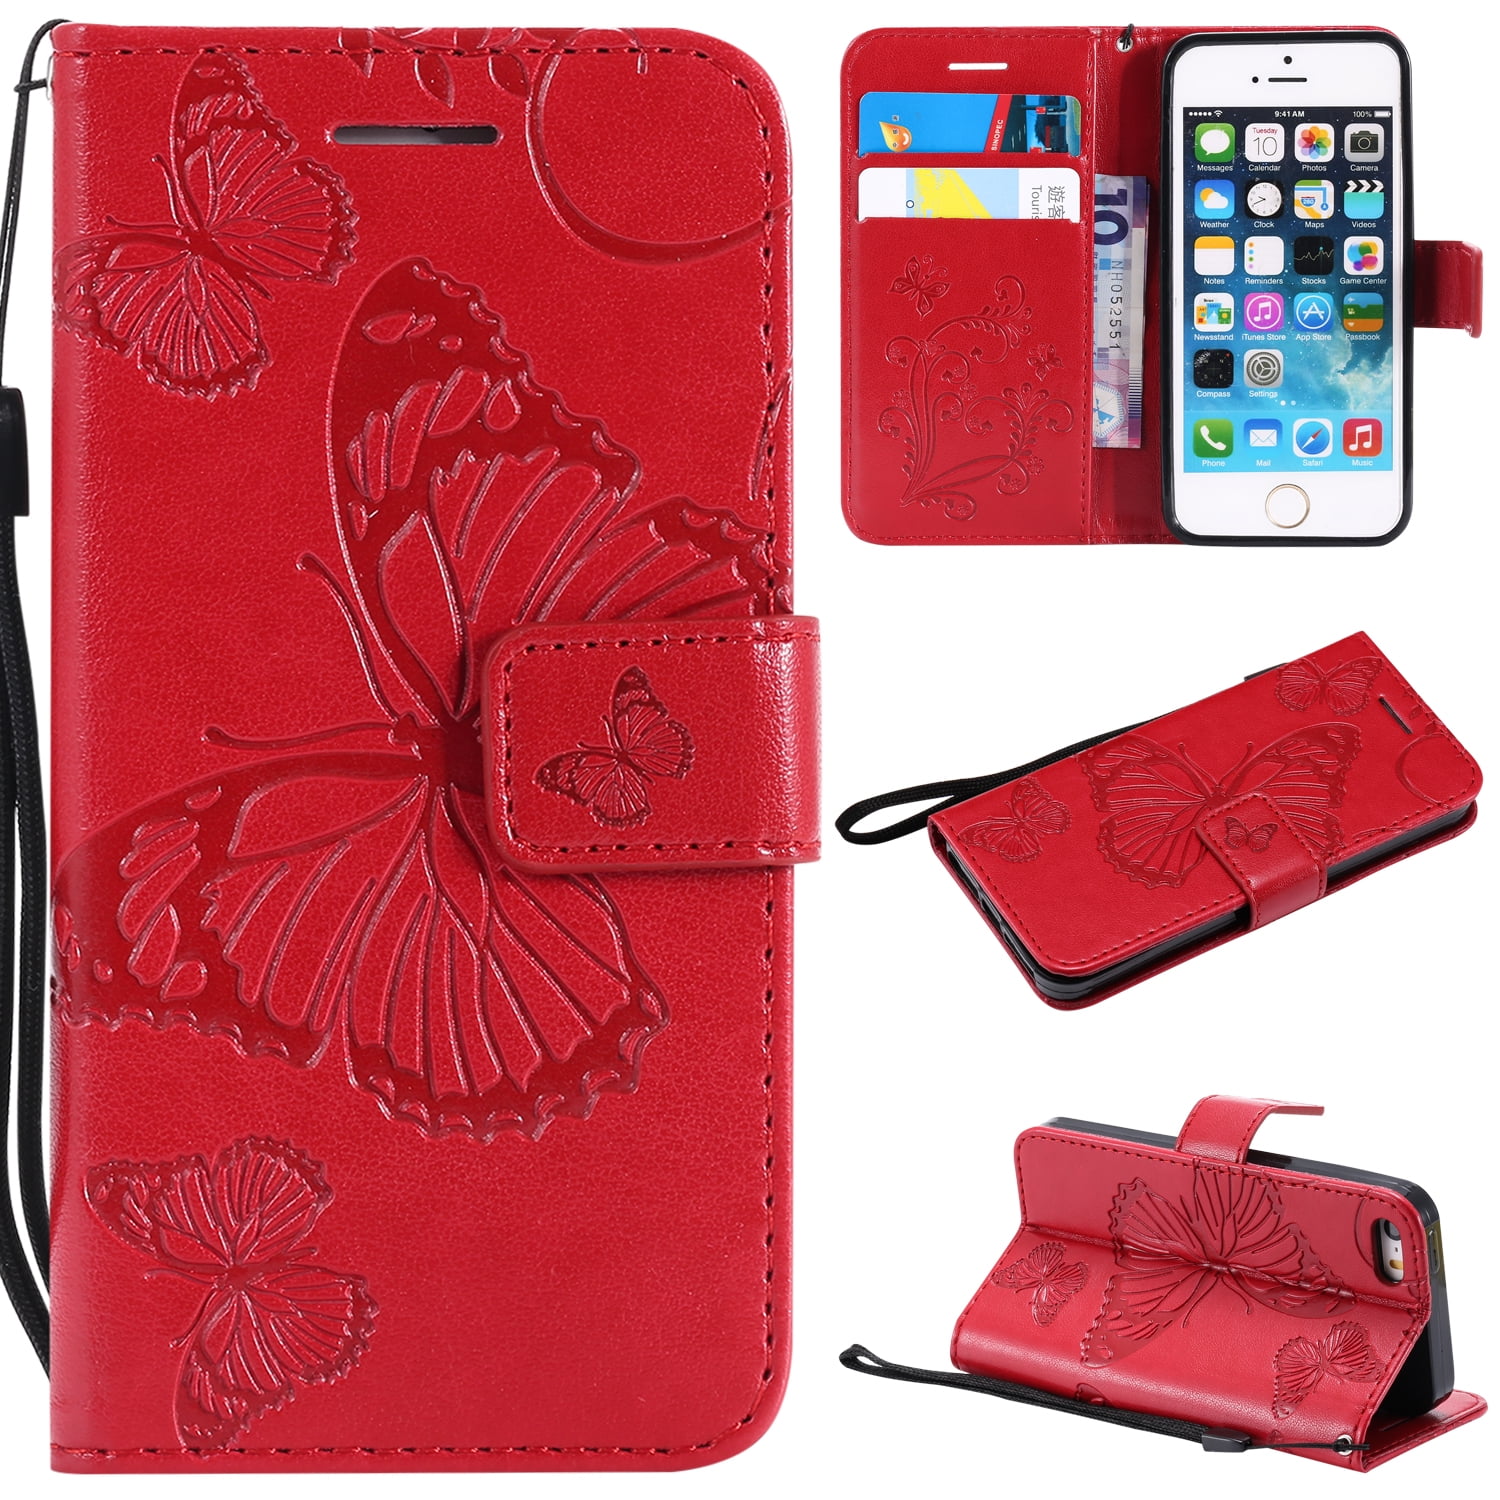 Kent Wonder Anoi iPhone 5S Case,iPhone 5 Case,iPhone SE(2016） Wallet case, Allytech Pretty  Retro Embossed Butterfly Flower Design Pu Leather Book Style Wallet Flip  Case Cover for Apple iPhone 5/ 5S /SE(2016）, Red - Walmart.com